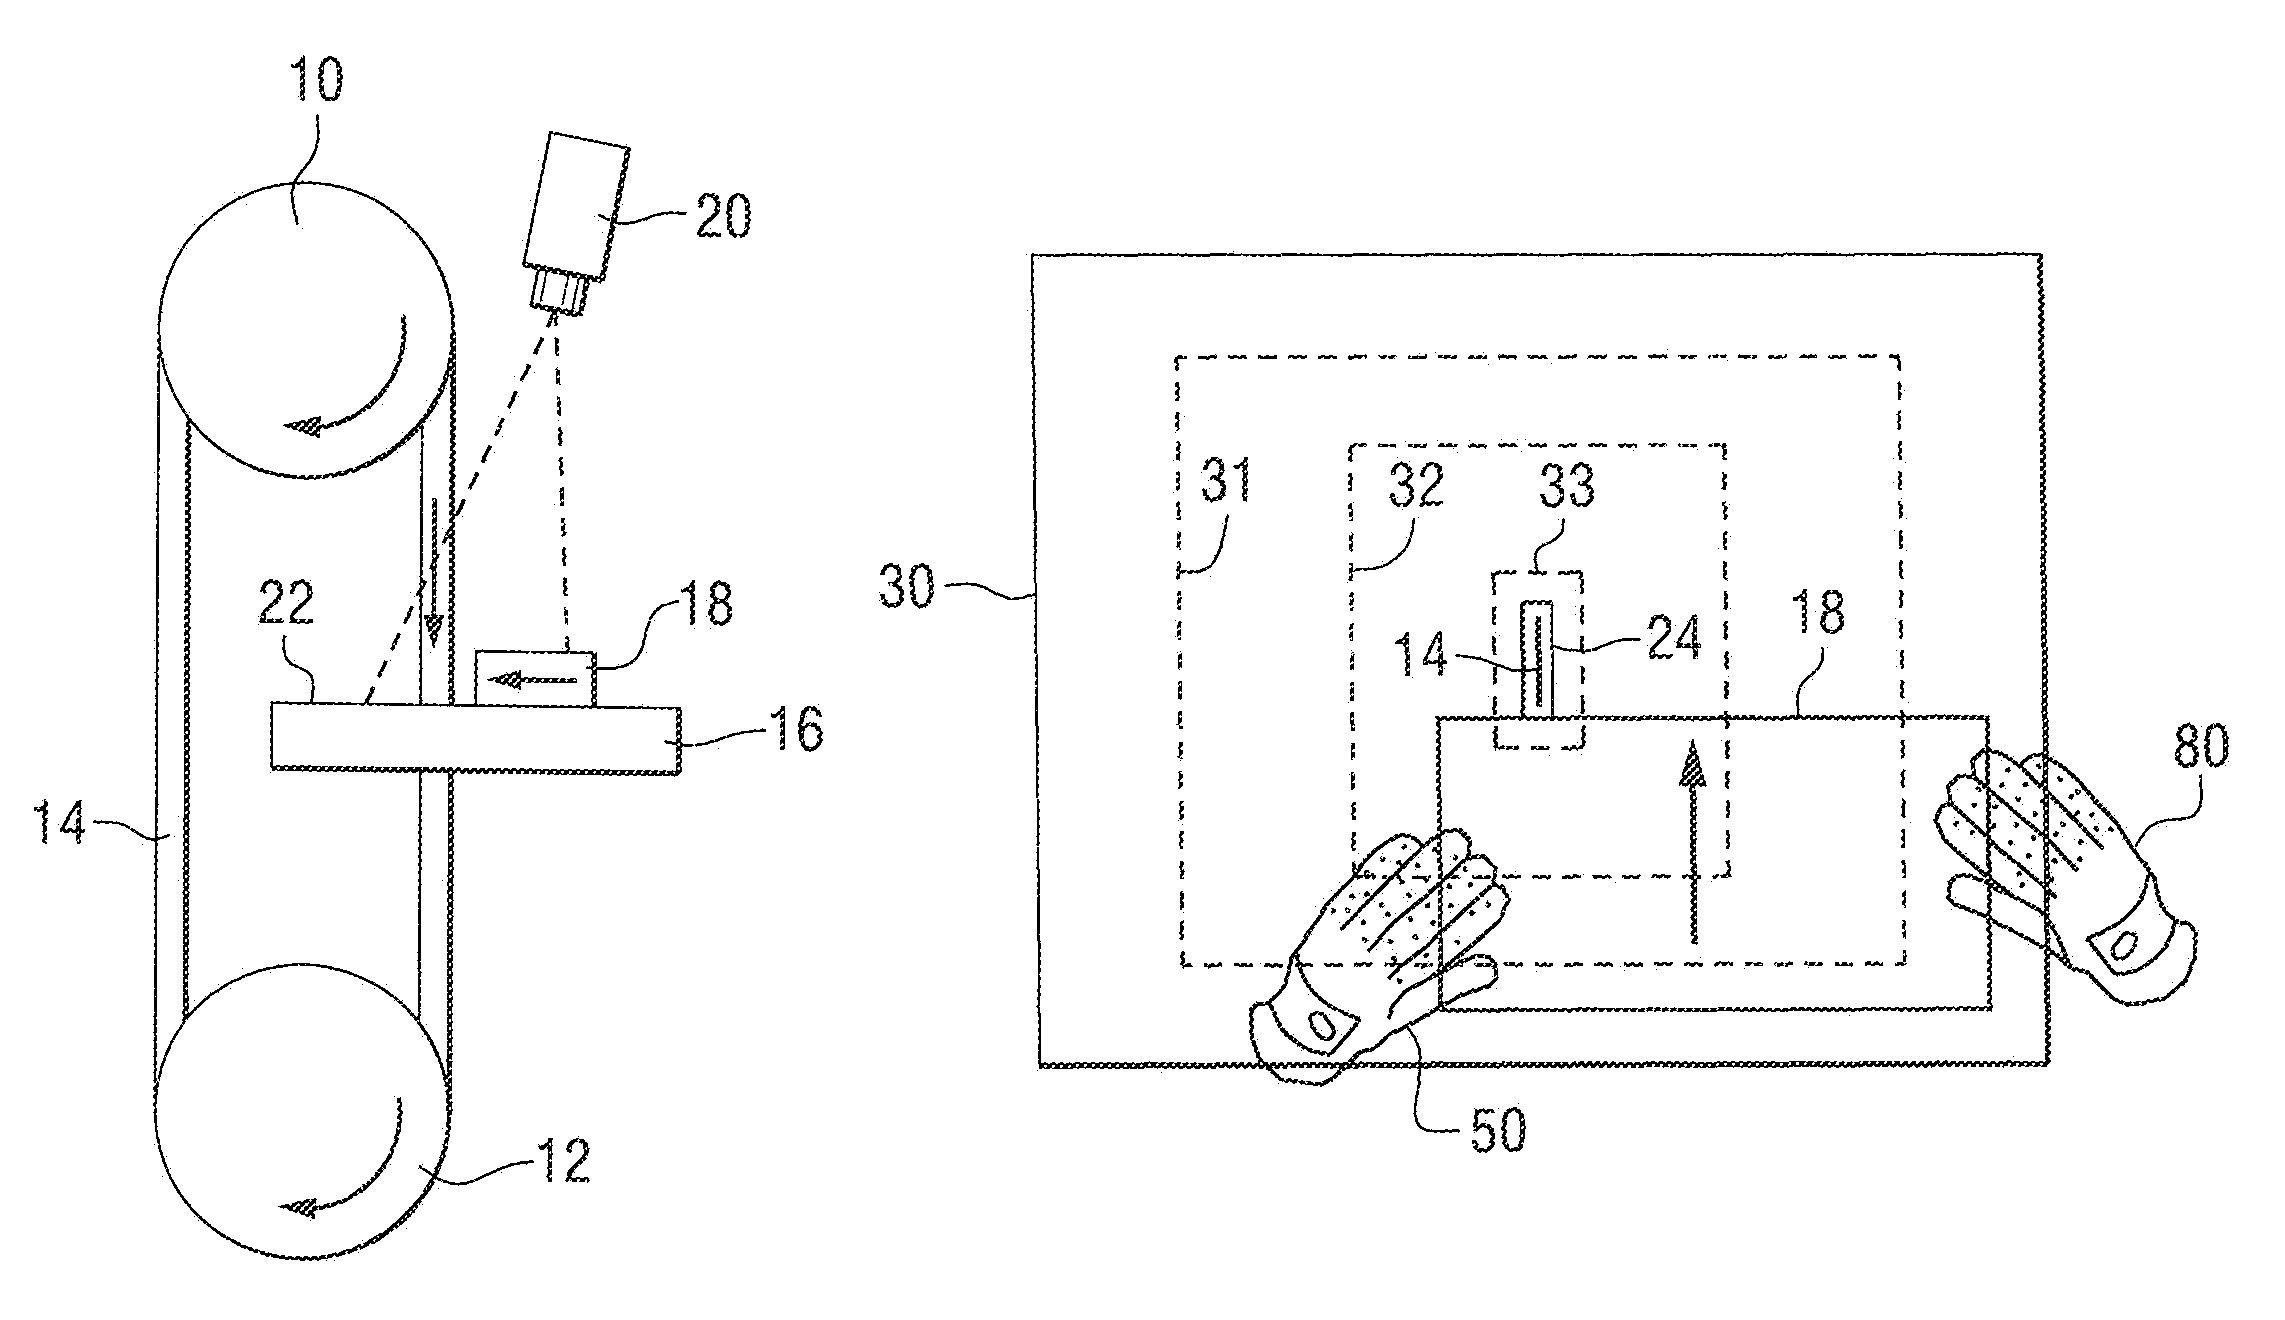 Method for sensing the presence of a human body part within a region of a machine tool